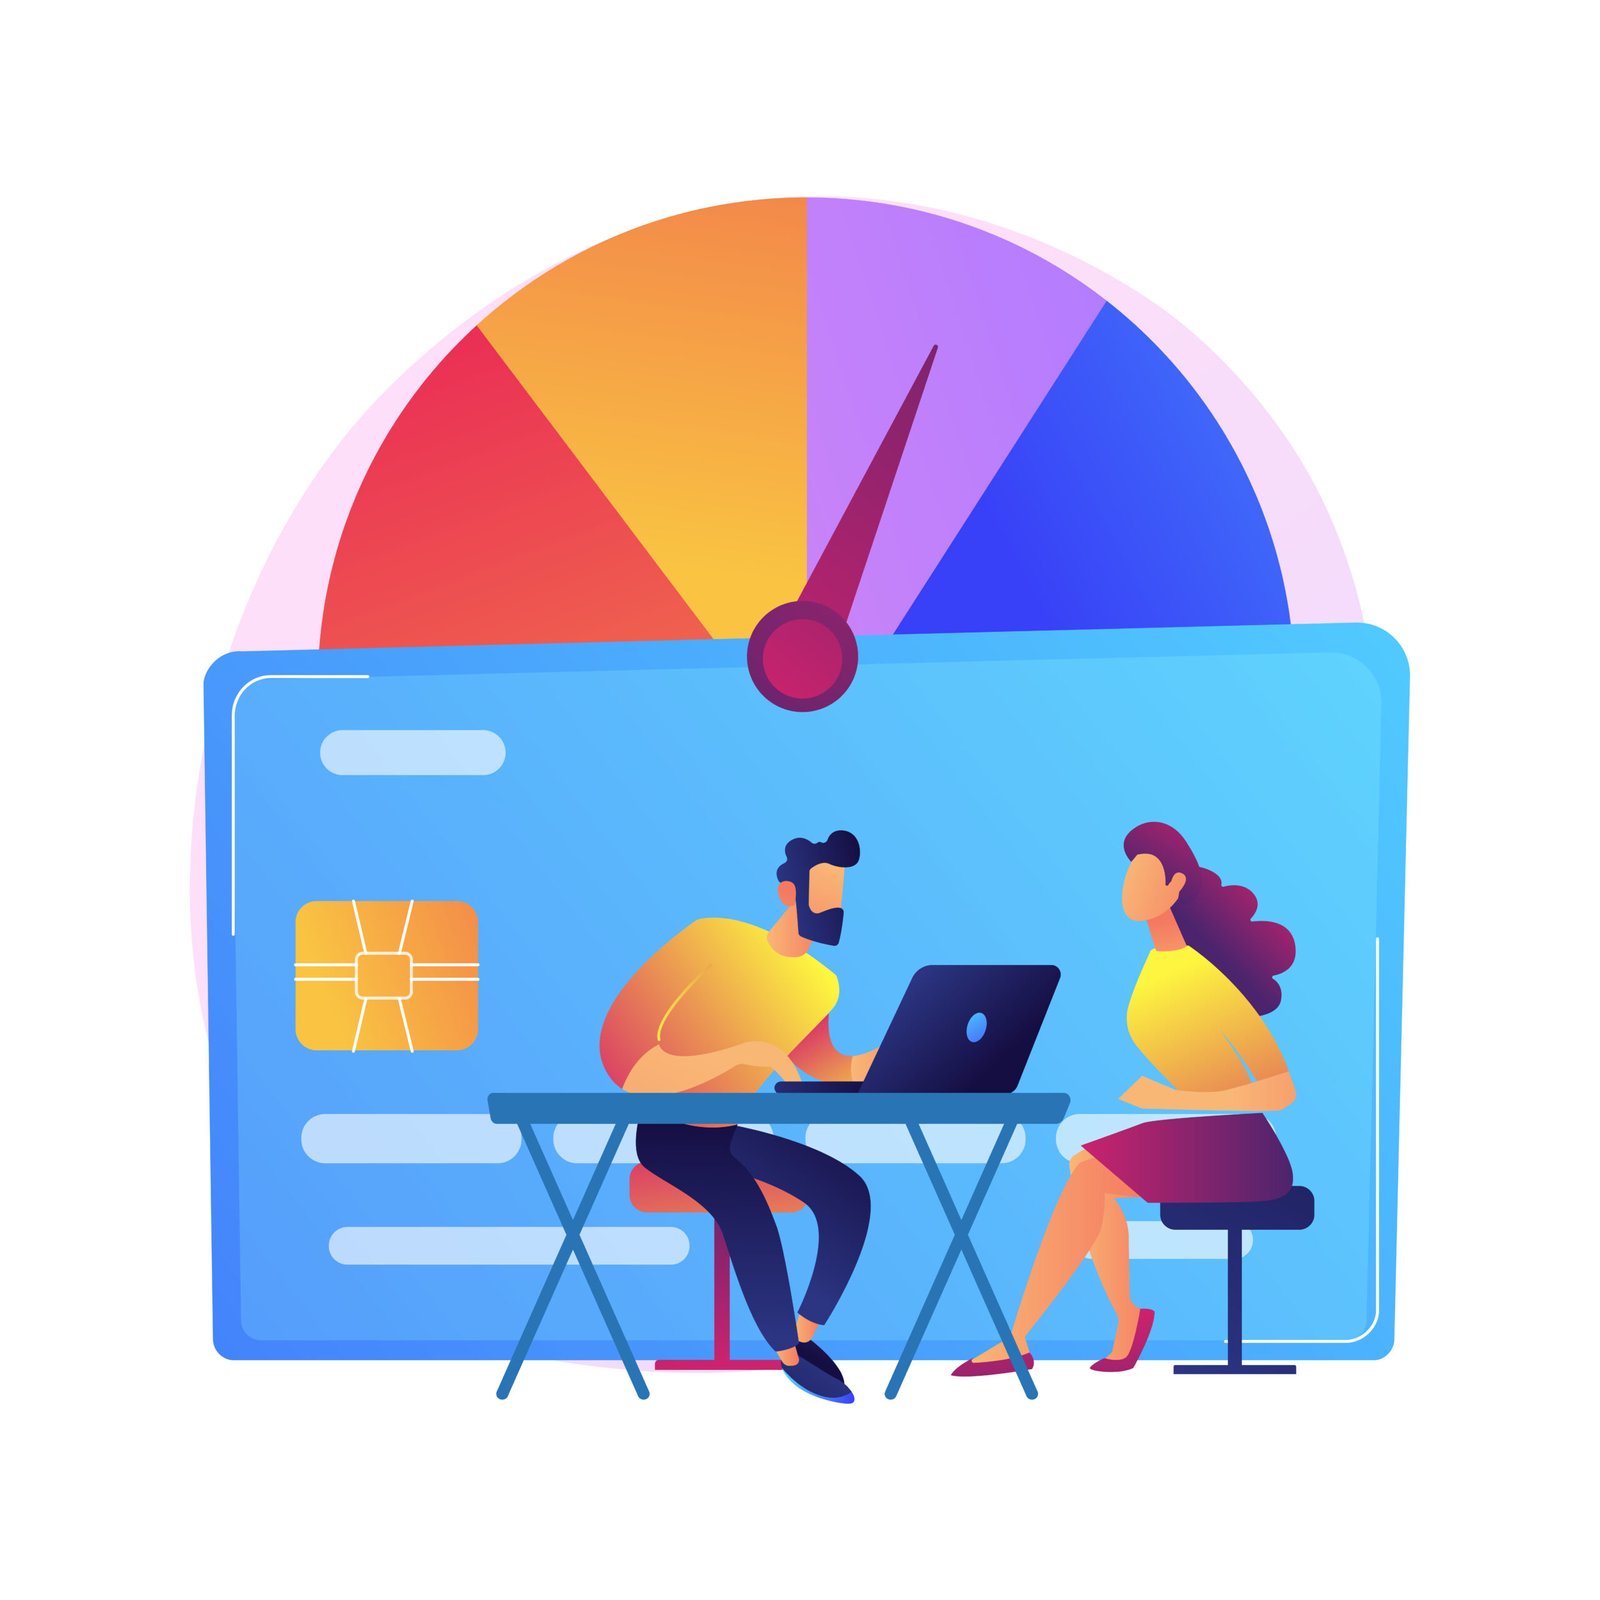 Paying ability. Creditor and borrower shaking hands. Deal gesture, trust level. Bank operation, financial transaction, successful arrangement. Vector isolated concept metaphor illustration